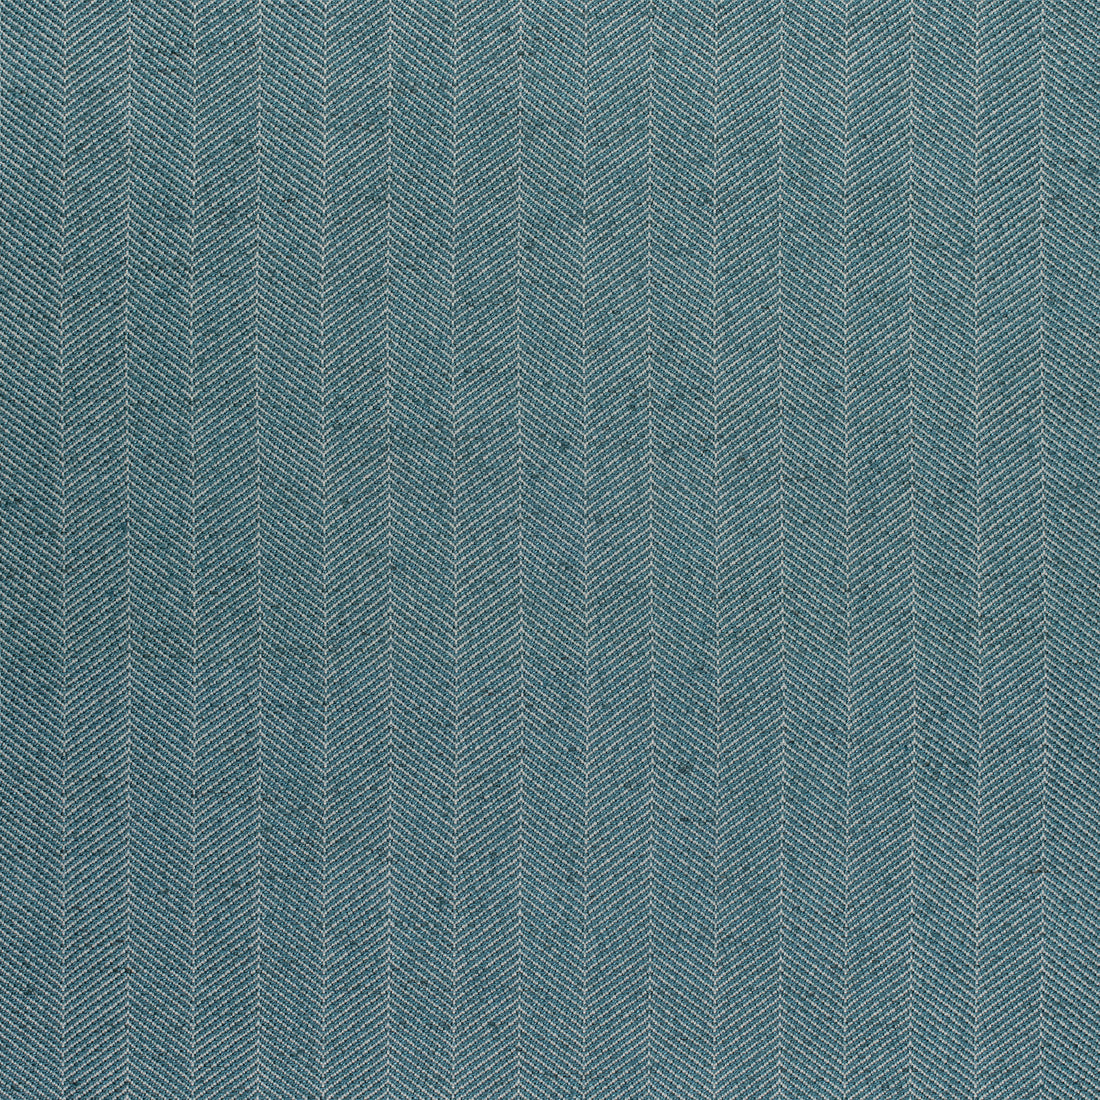 Hamilton Herringbone fabric in peacock color - pattern number W80672 - by Thibaut in the Pinnacle collection